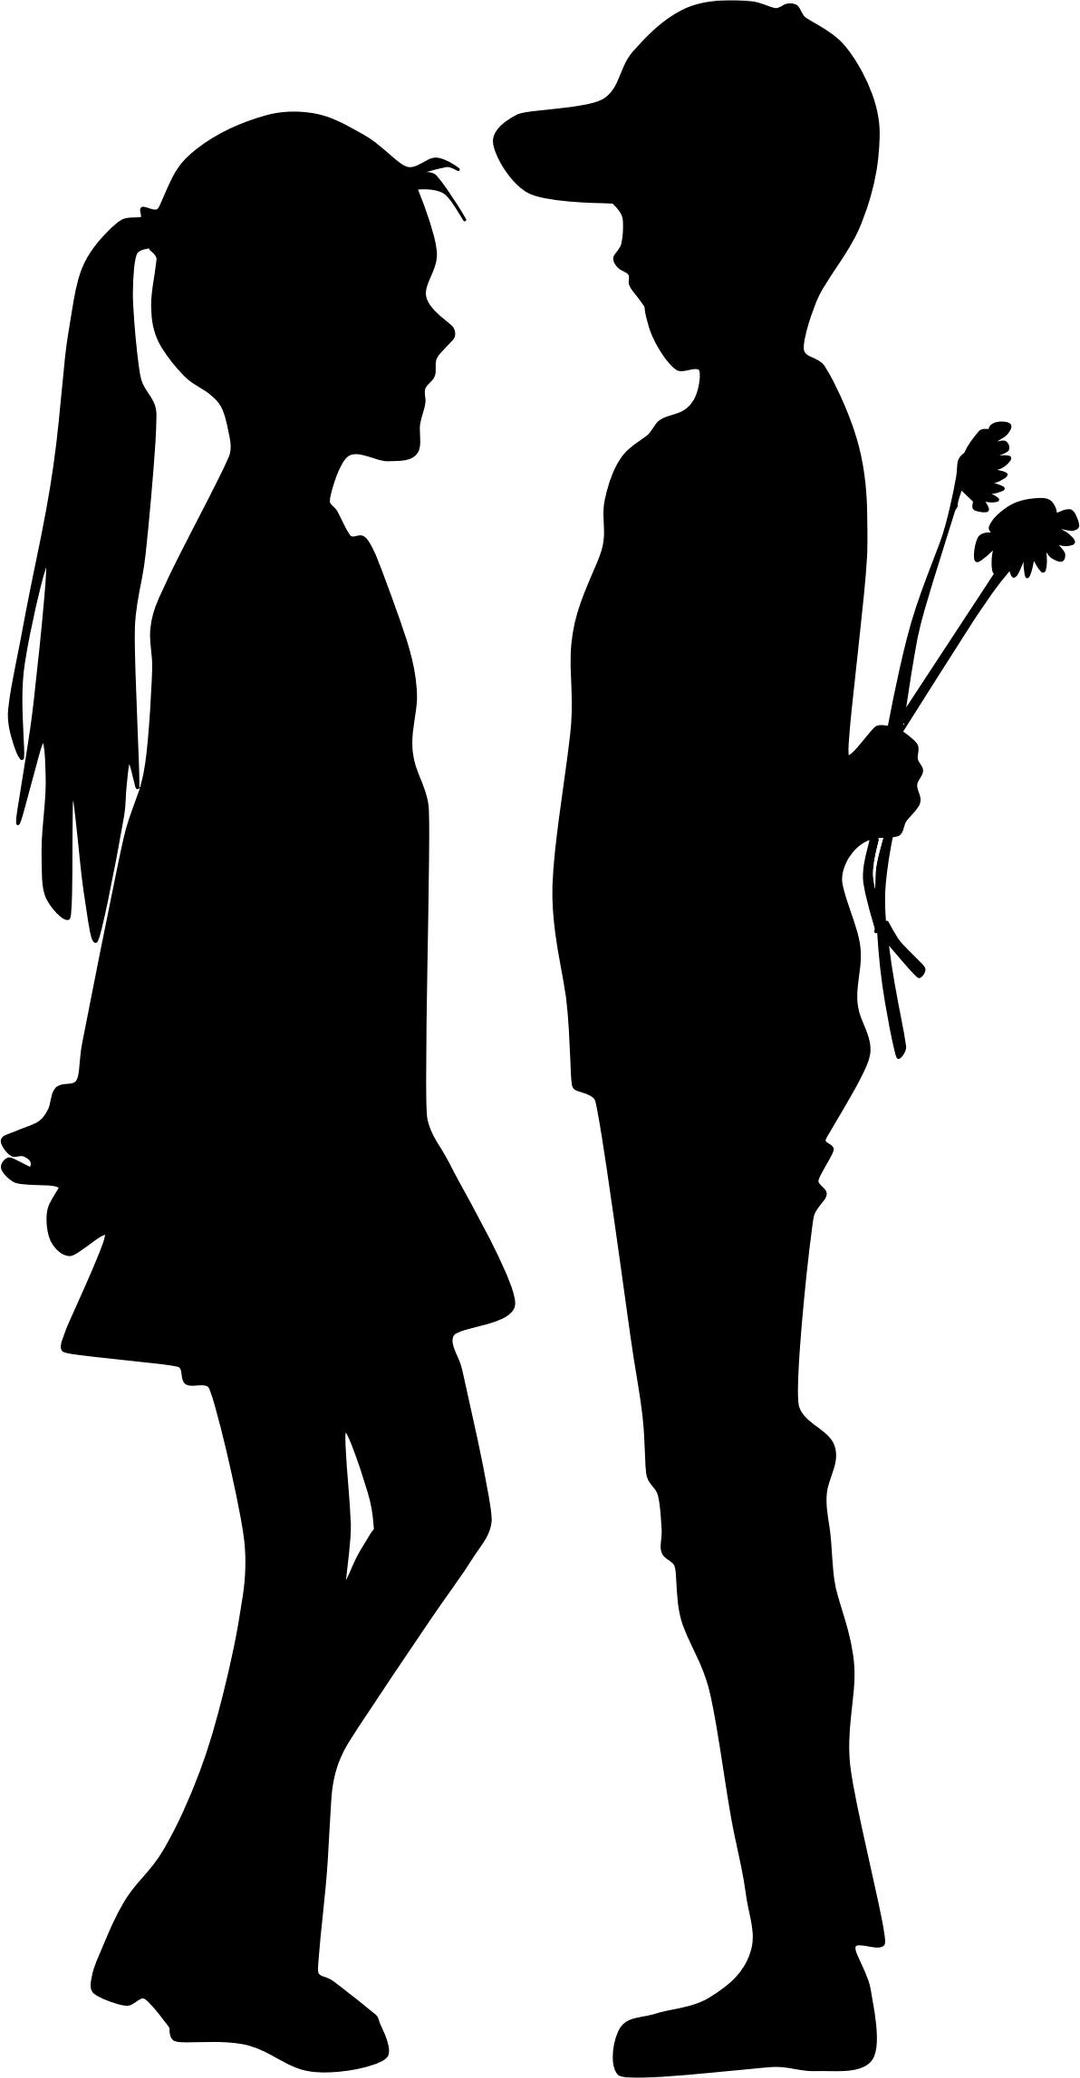 Boy Giving Flowers To Girl Silhouette png transparent